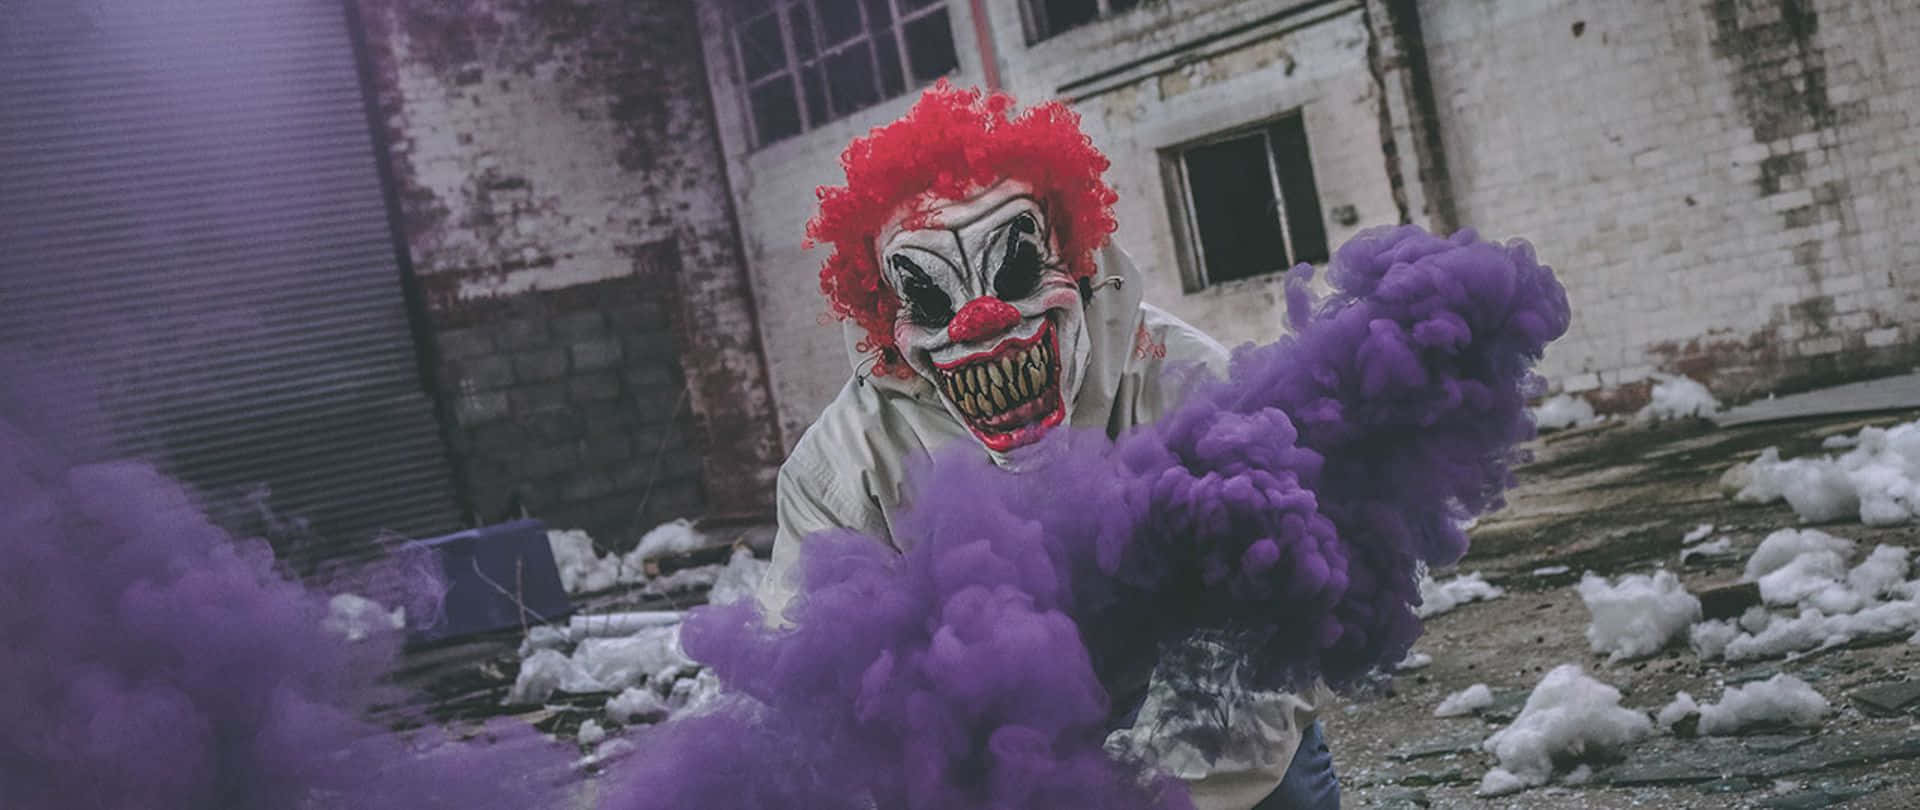 A Clown With Purple Smoke In His Hands